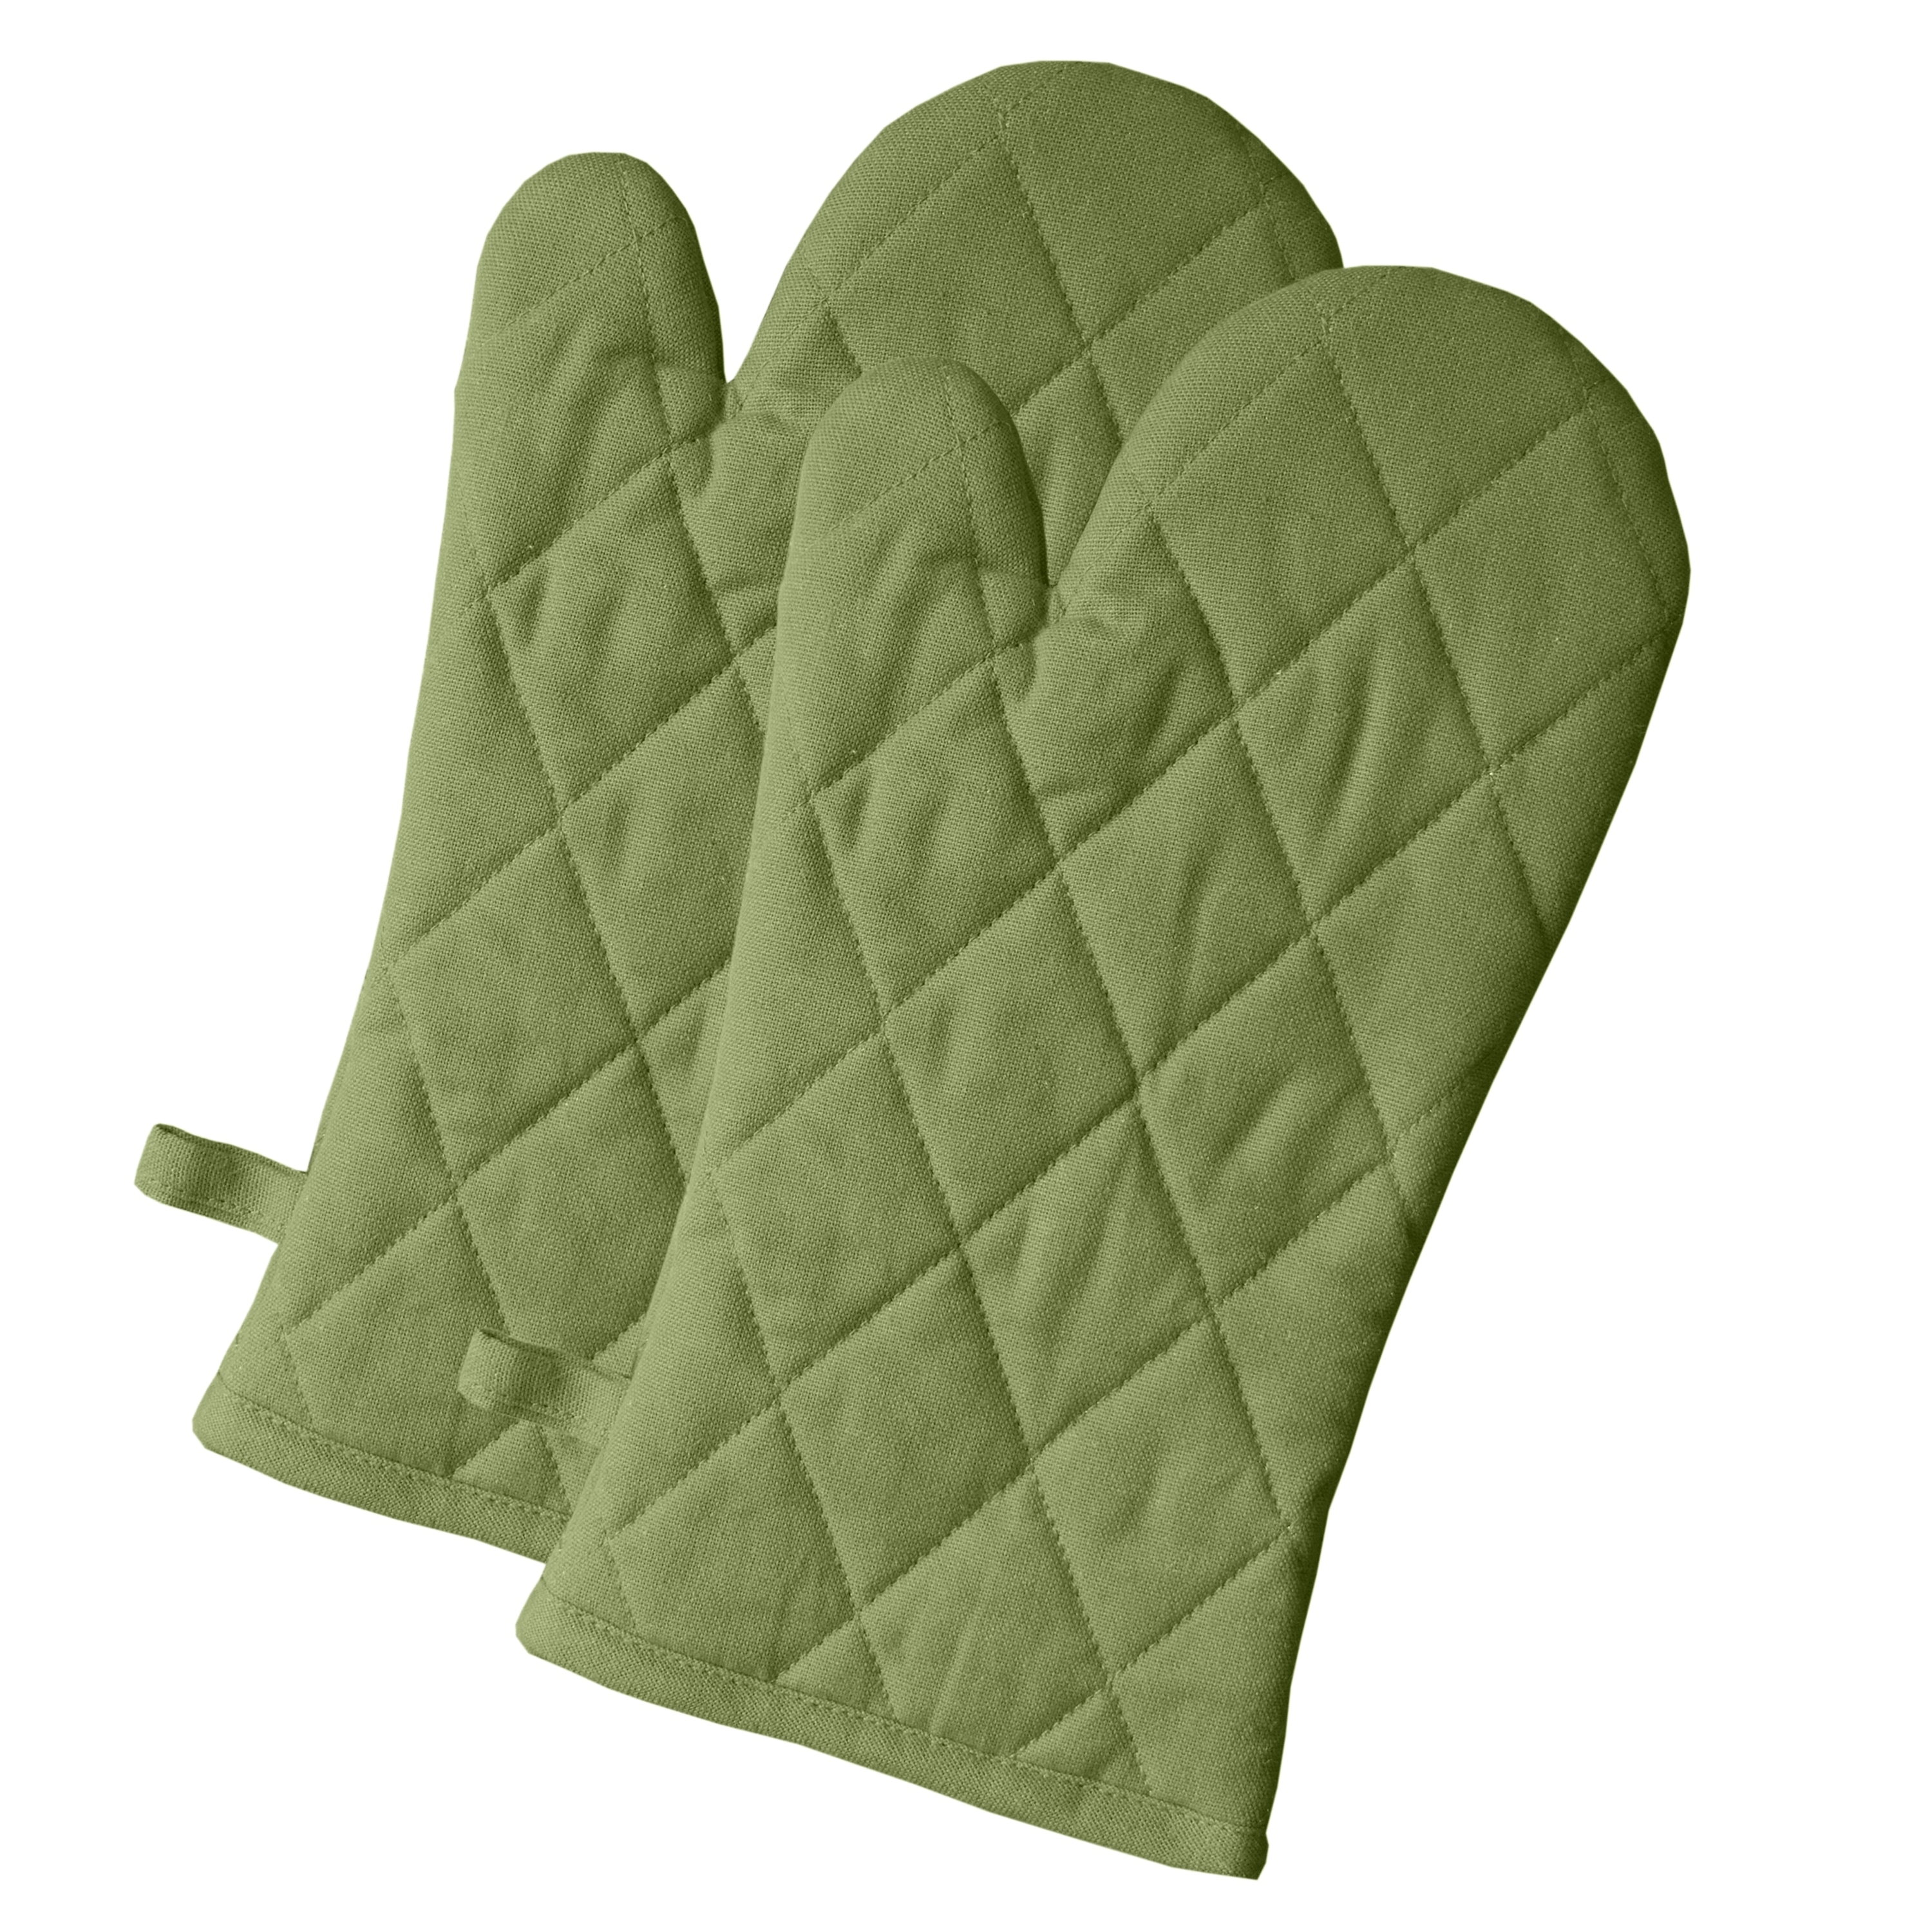 https://ak1.ostkcdn.com/images/products/is/images/direct/6fa20c8d1a5057854e05e4c95c26fe94e84b611c/Fabstyles-Solo-Waffle-Cotton-Oven-Mitt-%26-Pot-Holder-Set-of-4.jpg